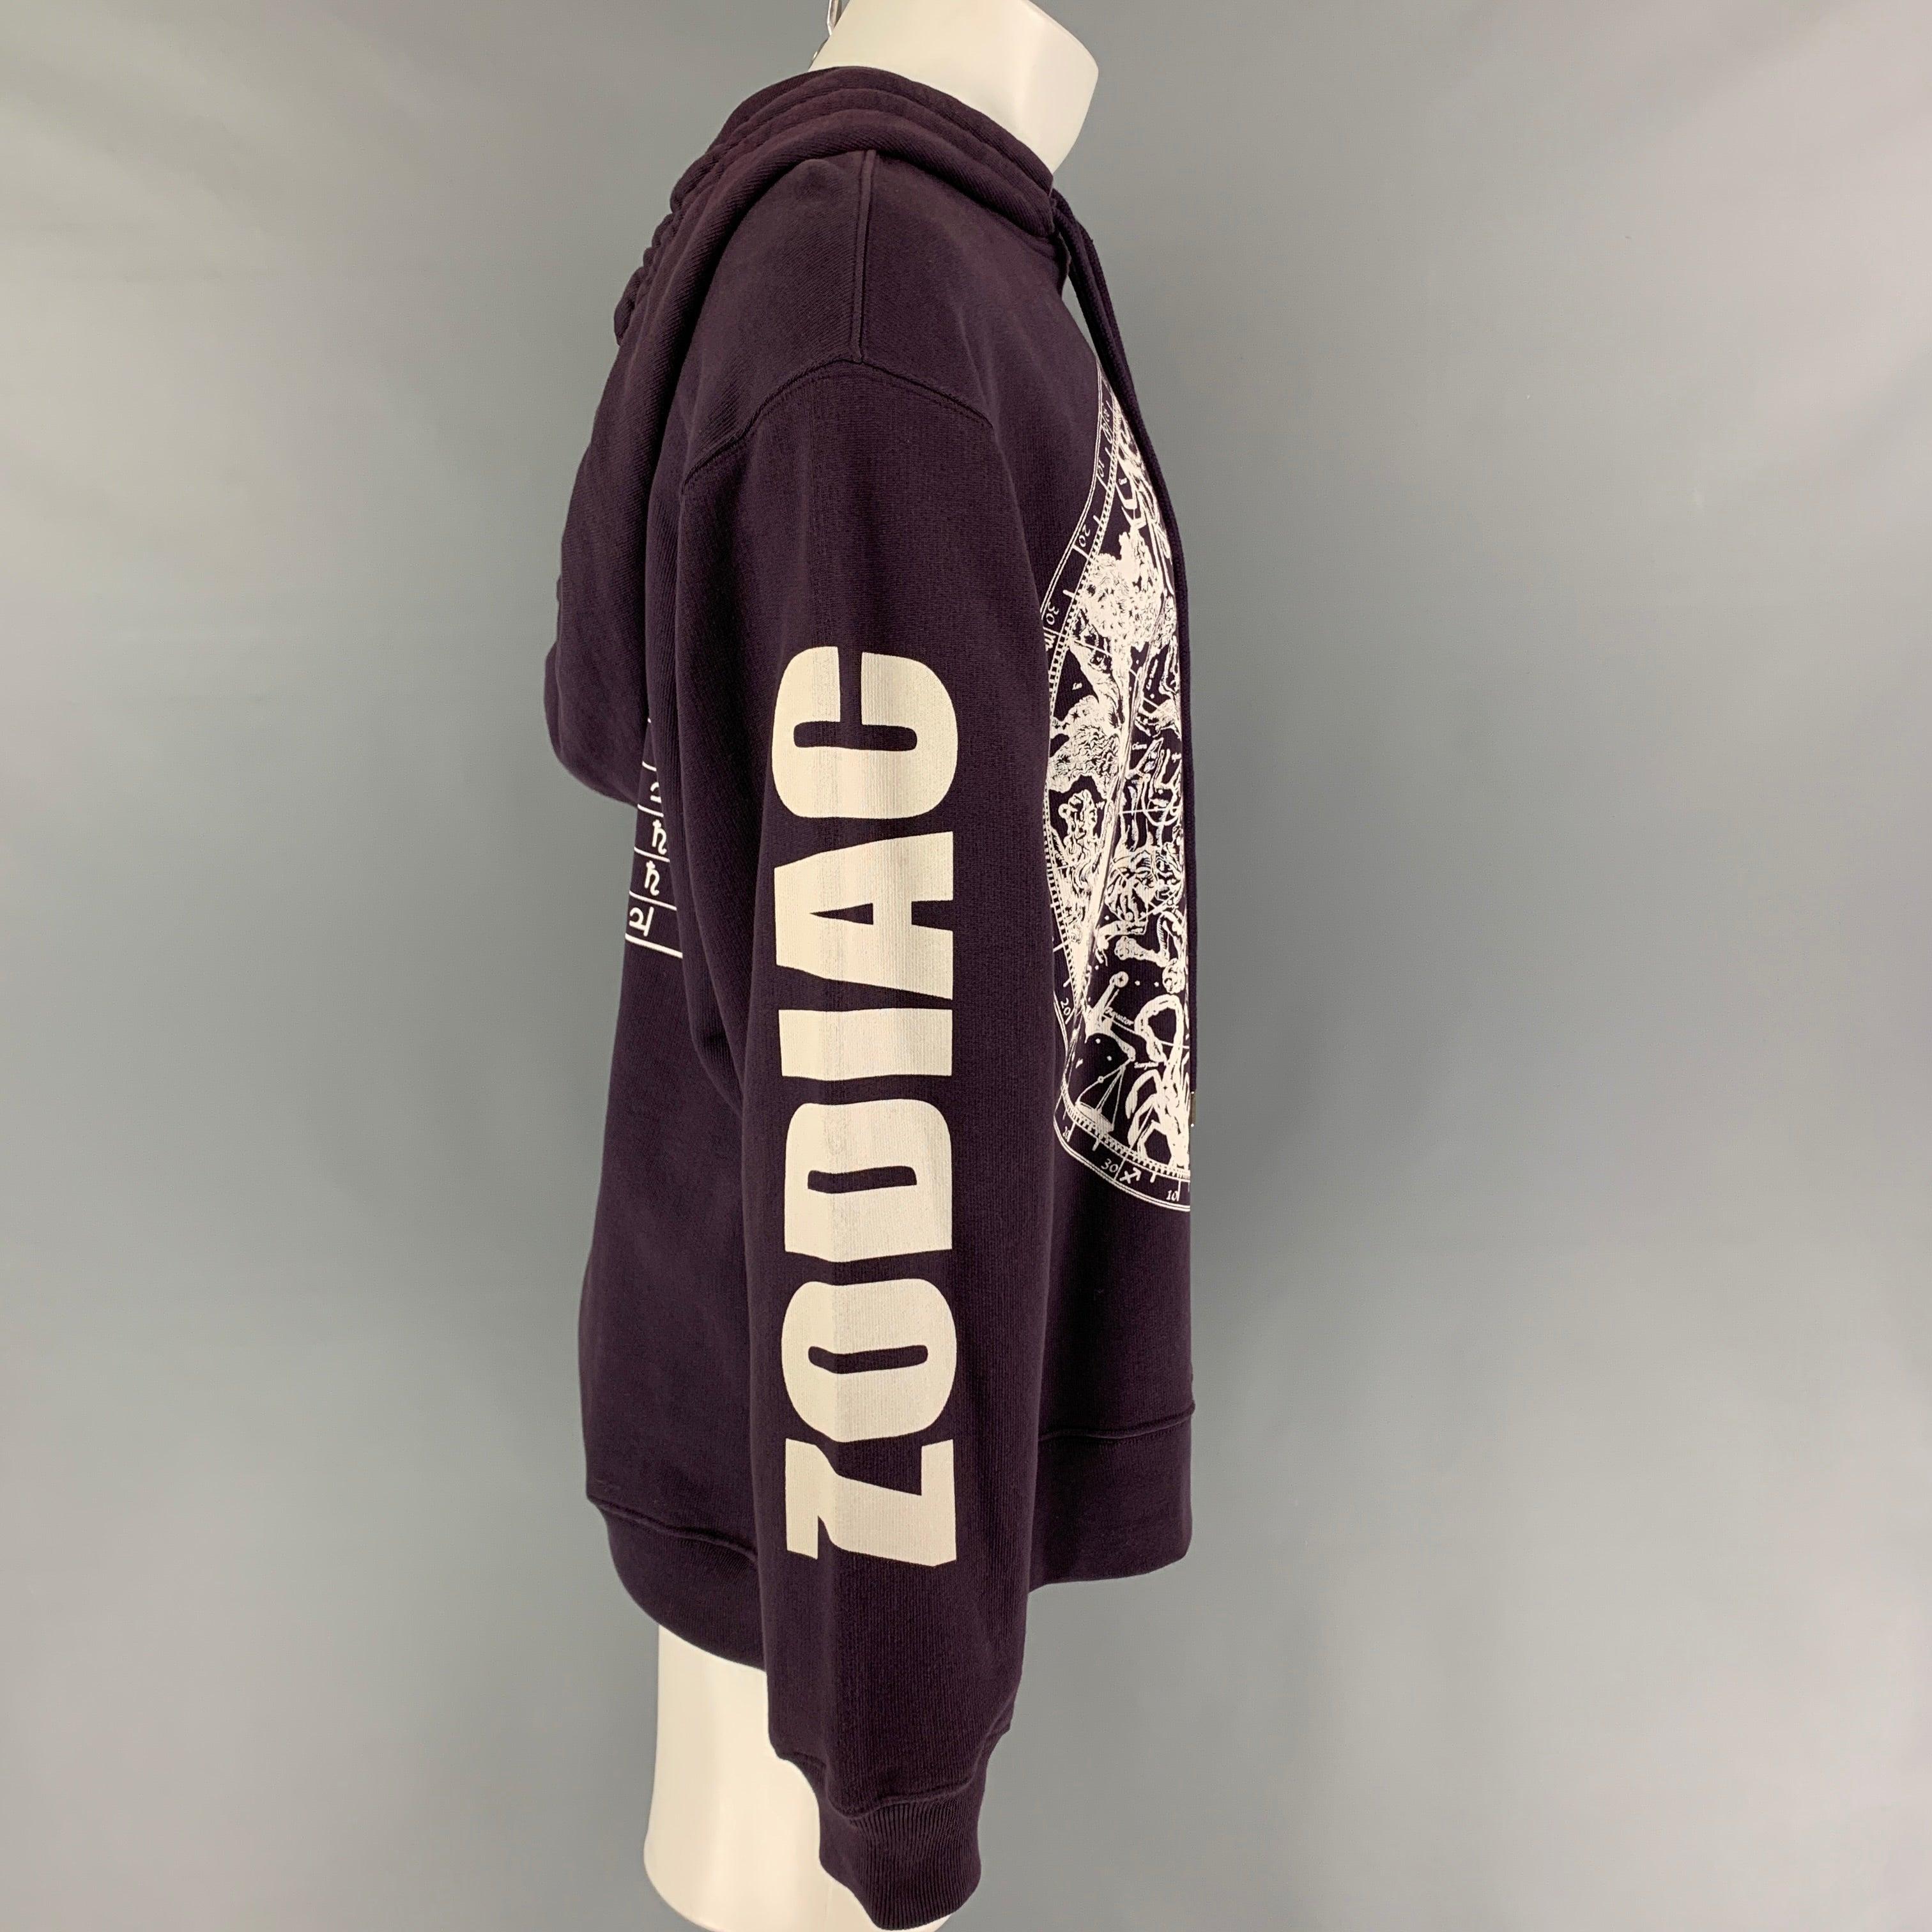 DRIES VAN NOTEN sweatshirt comes in a mauve cotton featuring a oversized fit, zodiac graphic design, double drawstring, and a hooded style.New With Tags. 

Marked:   S 

Measurements: 
 
Shoulder: 24 inches  Chest: 46 inches Sleeve: 25.5 inches 